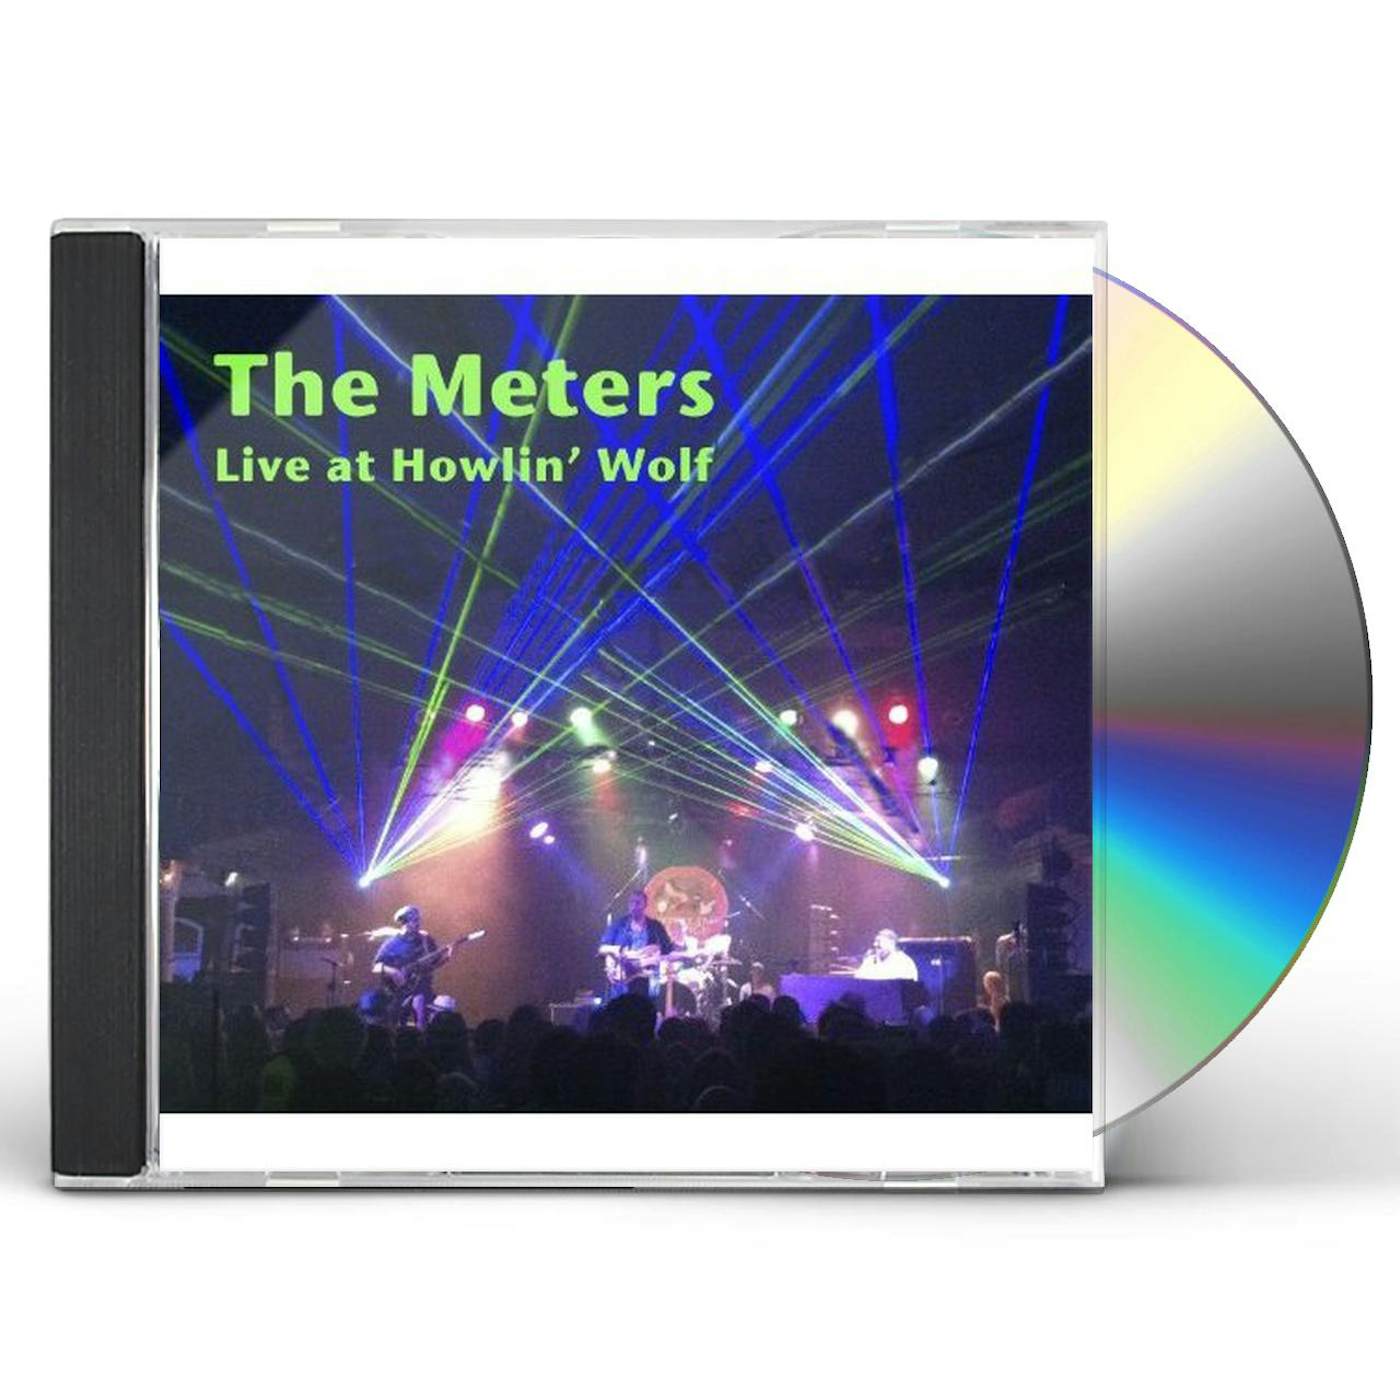 The Meters LIVE AT HOWLIN' WOLF 2012 CD